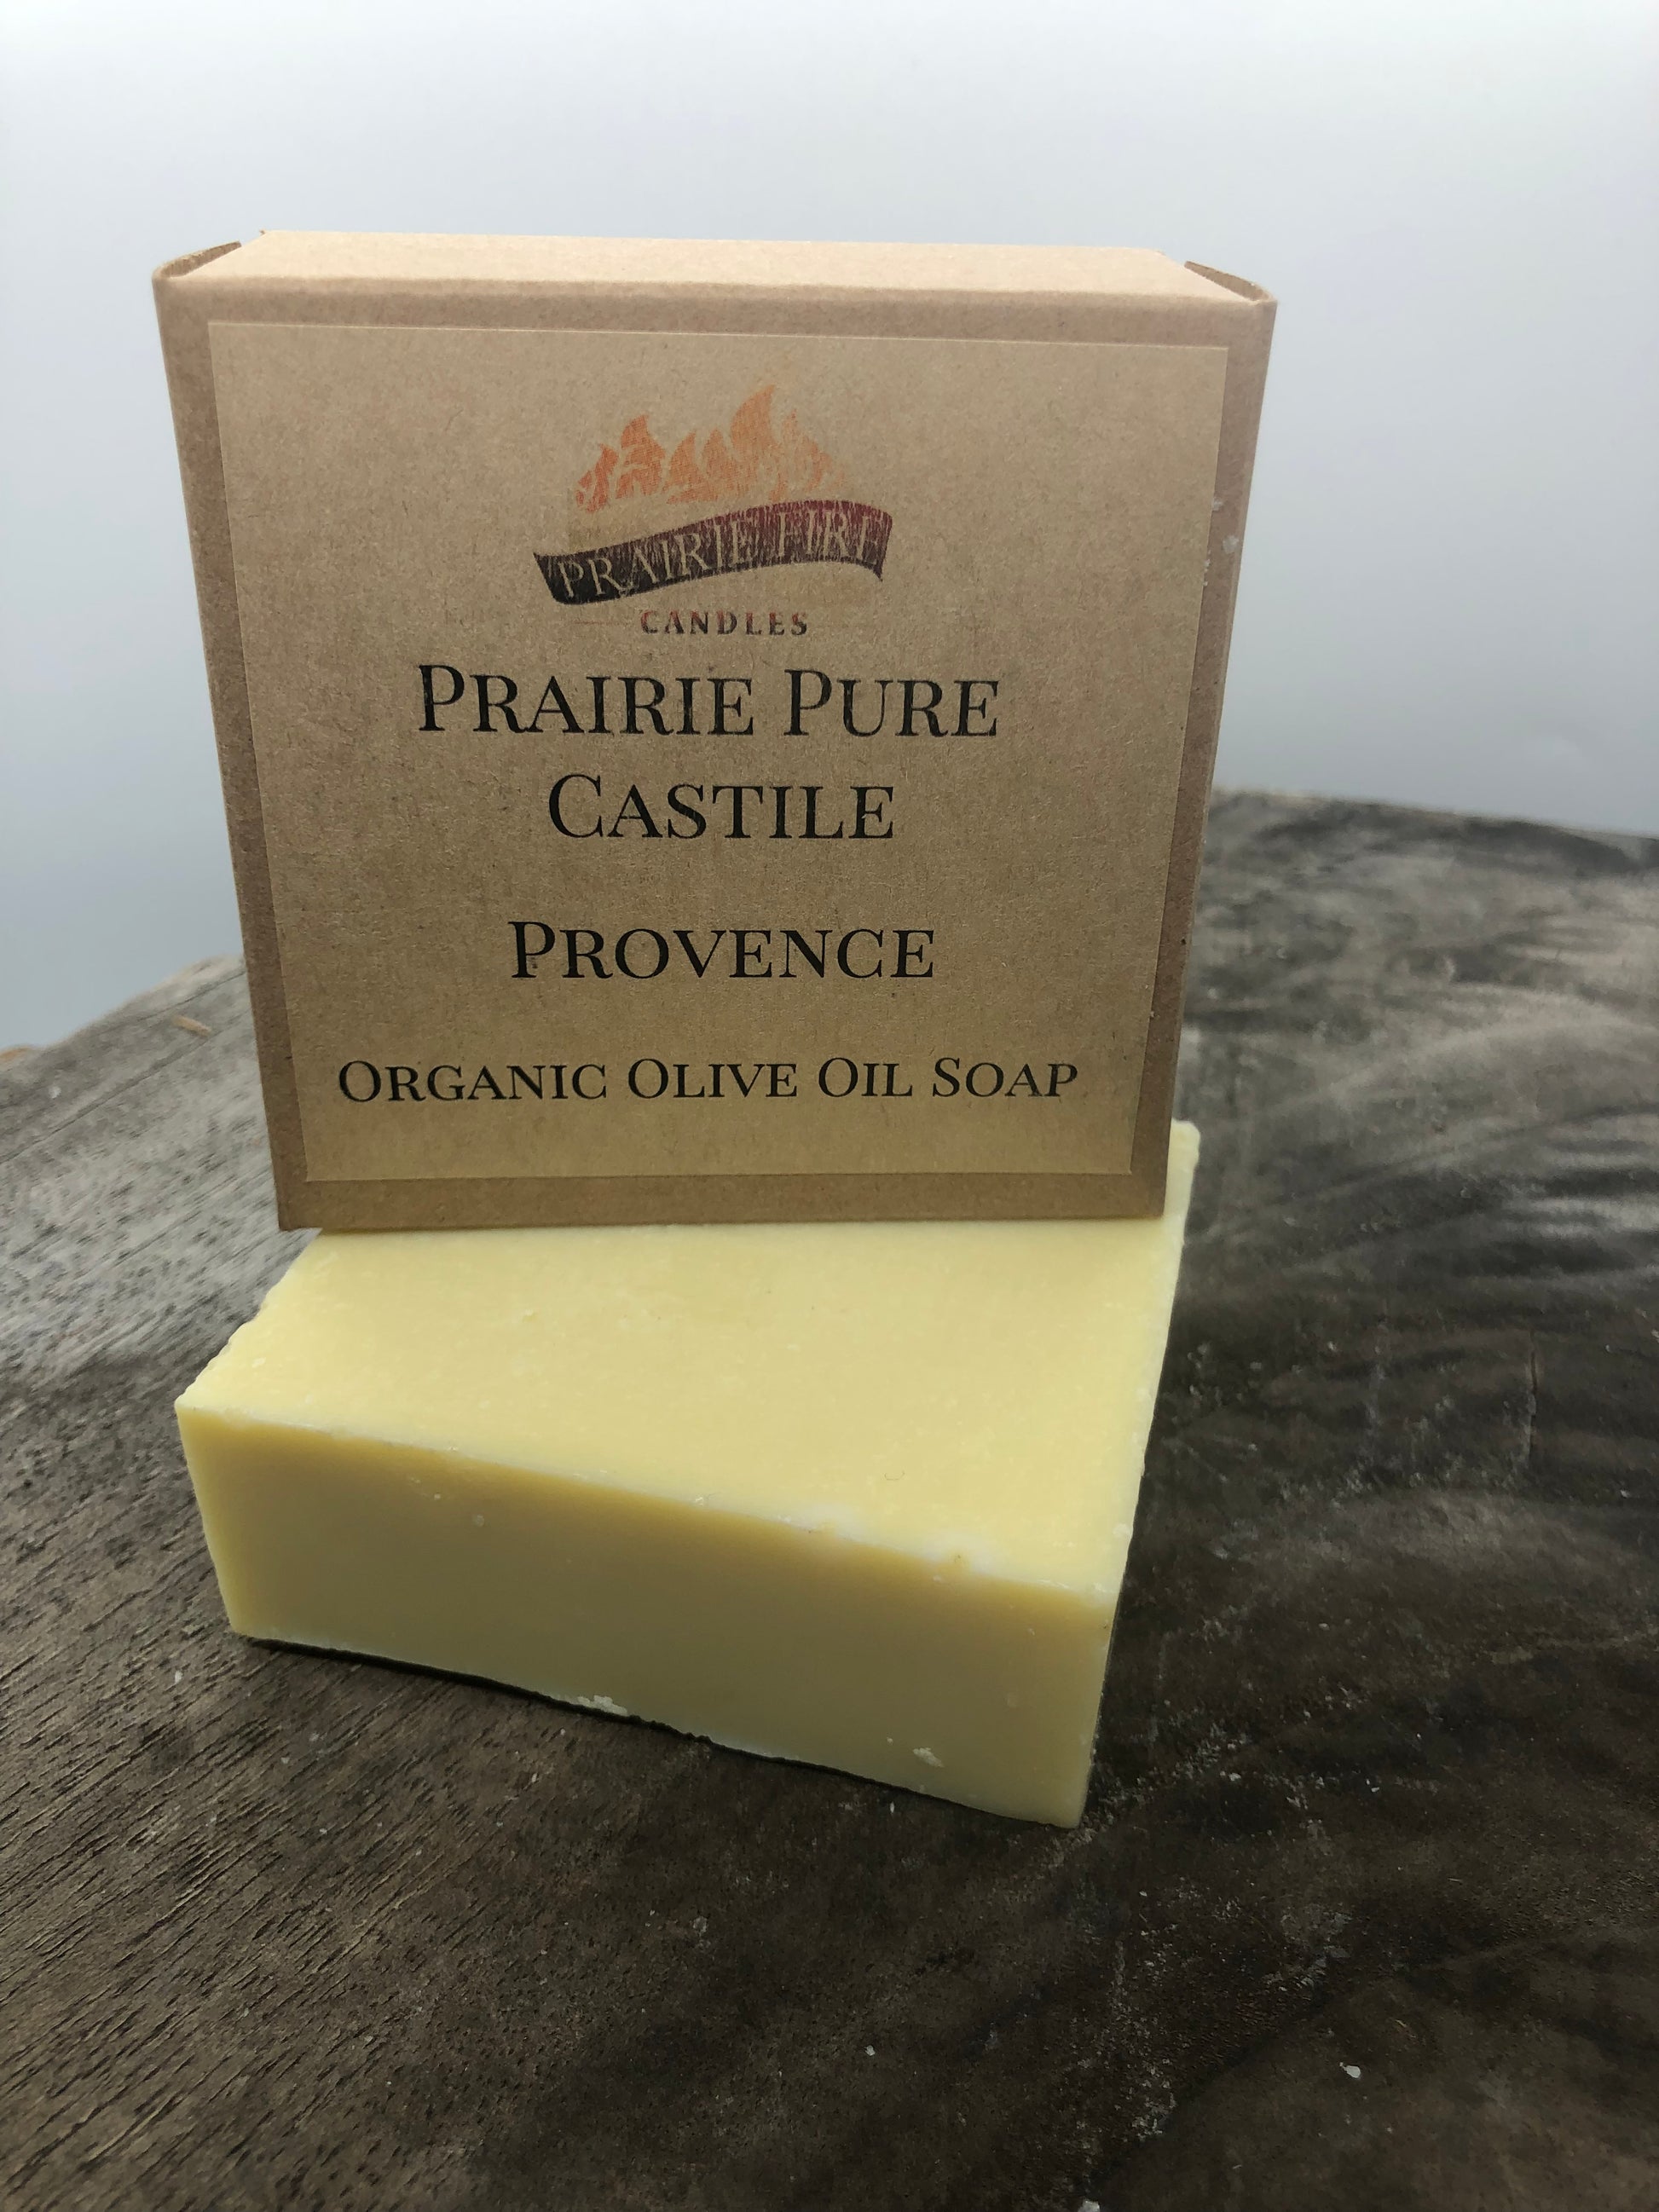 Provence (Lavender) Real Castile Organic Olive Oil Soap for Sensitive Skin - Dye Free - 100% Certified Organic Extra Virgin Olive Oil - Prairie Fire Candles